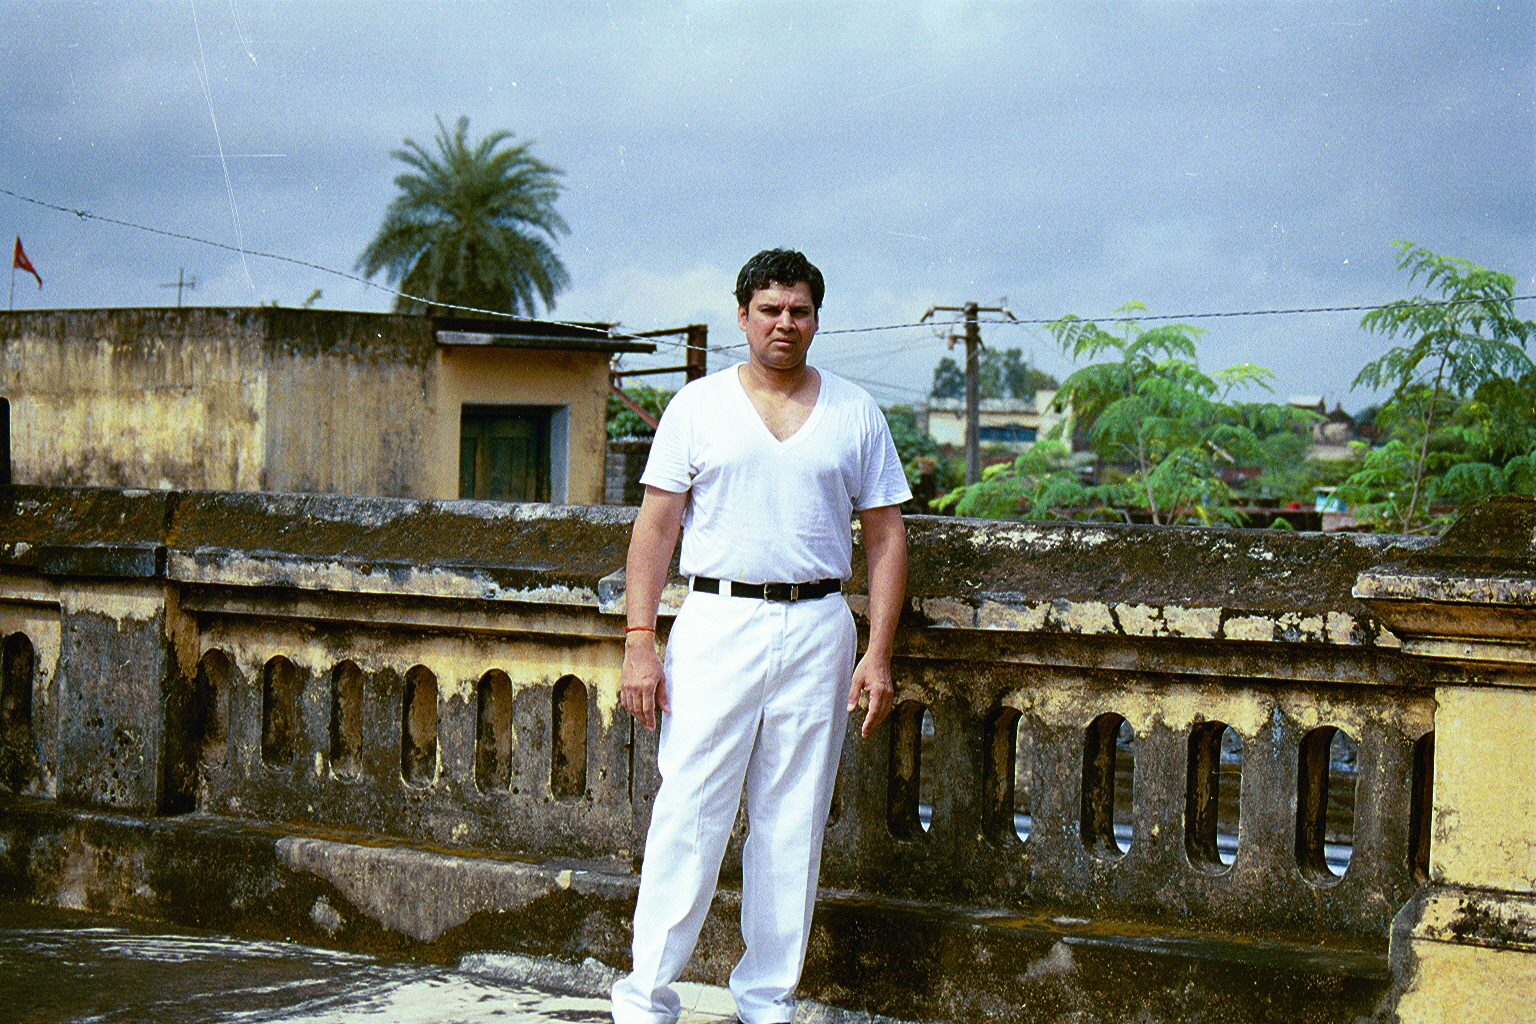 Myself on top of the house balcony; that overlooks the square courtyard